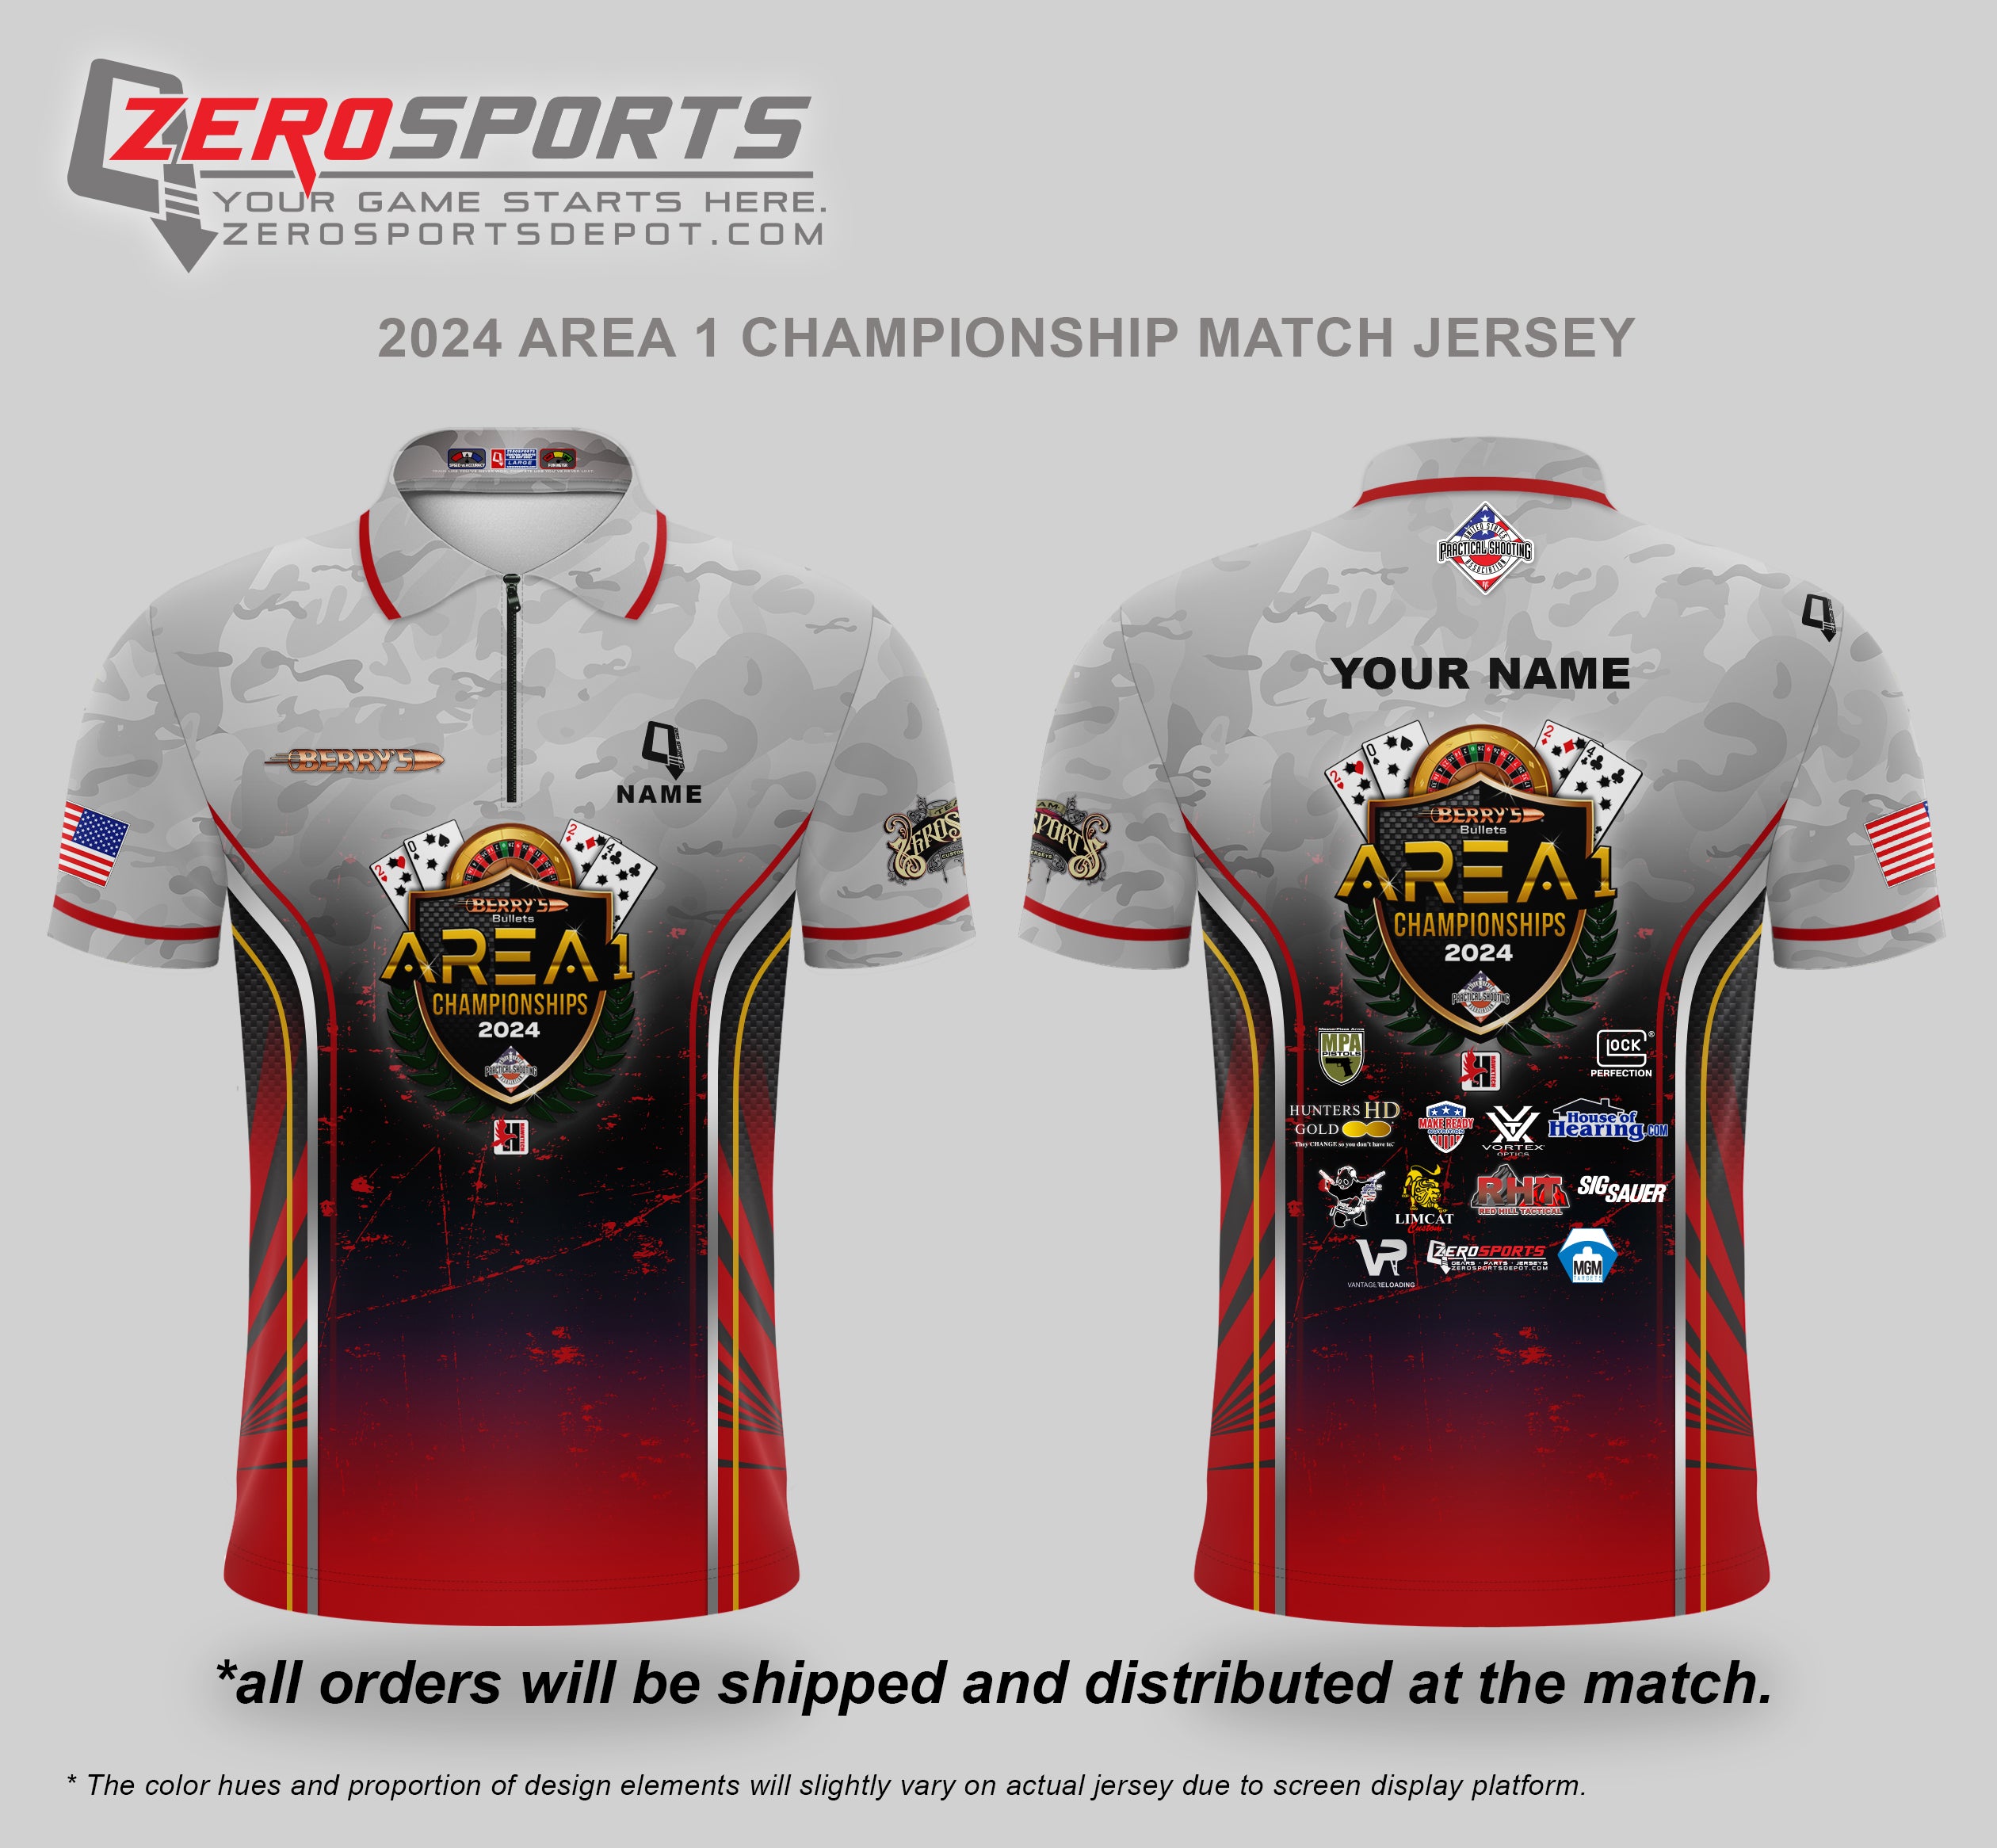 Berry's 2024 Area 1 Championship Match Jersey  **All orders after 4/12/2024 will be shipped directly to your address after the match.